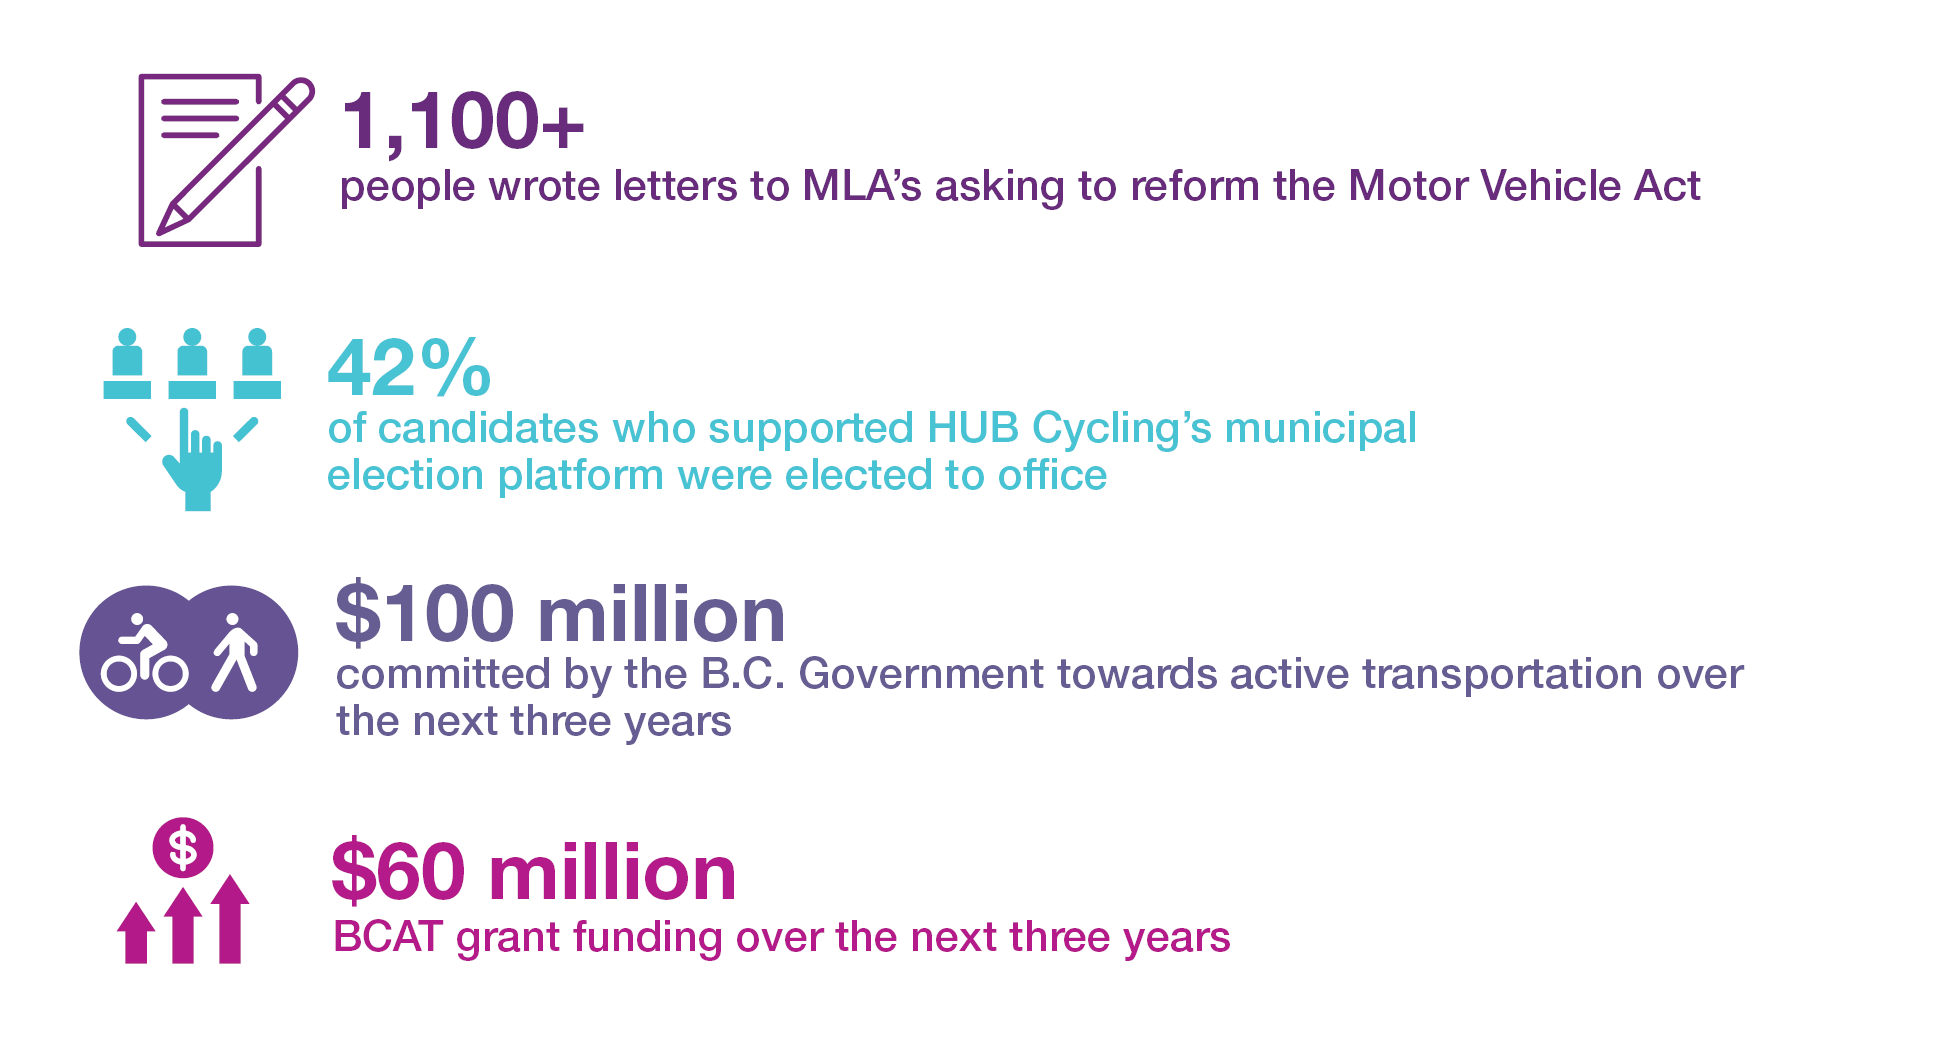 1,100+ people wrote letters to MLA's asking to reform the Motor Vehicle Act. 42% of candidates who supported HUB Cycling's municipal election platform were elected to office. $100 million dollars committed by the B.C. Government towards active transportation over the next three years. $60 million BCAT grant funding over the next three years.